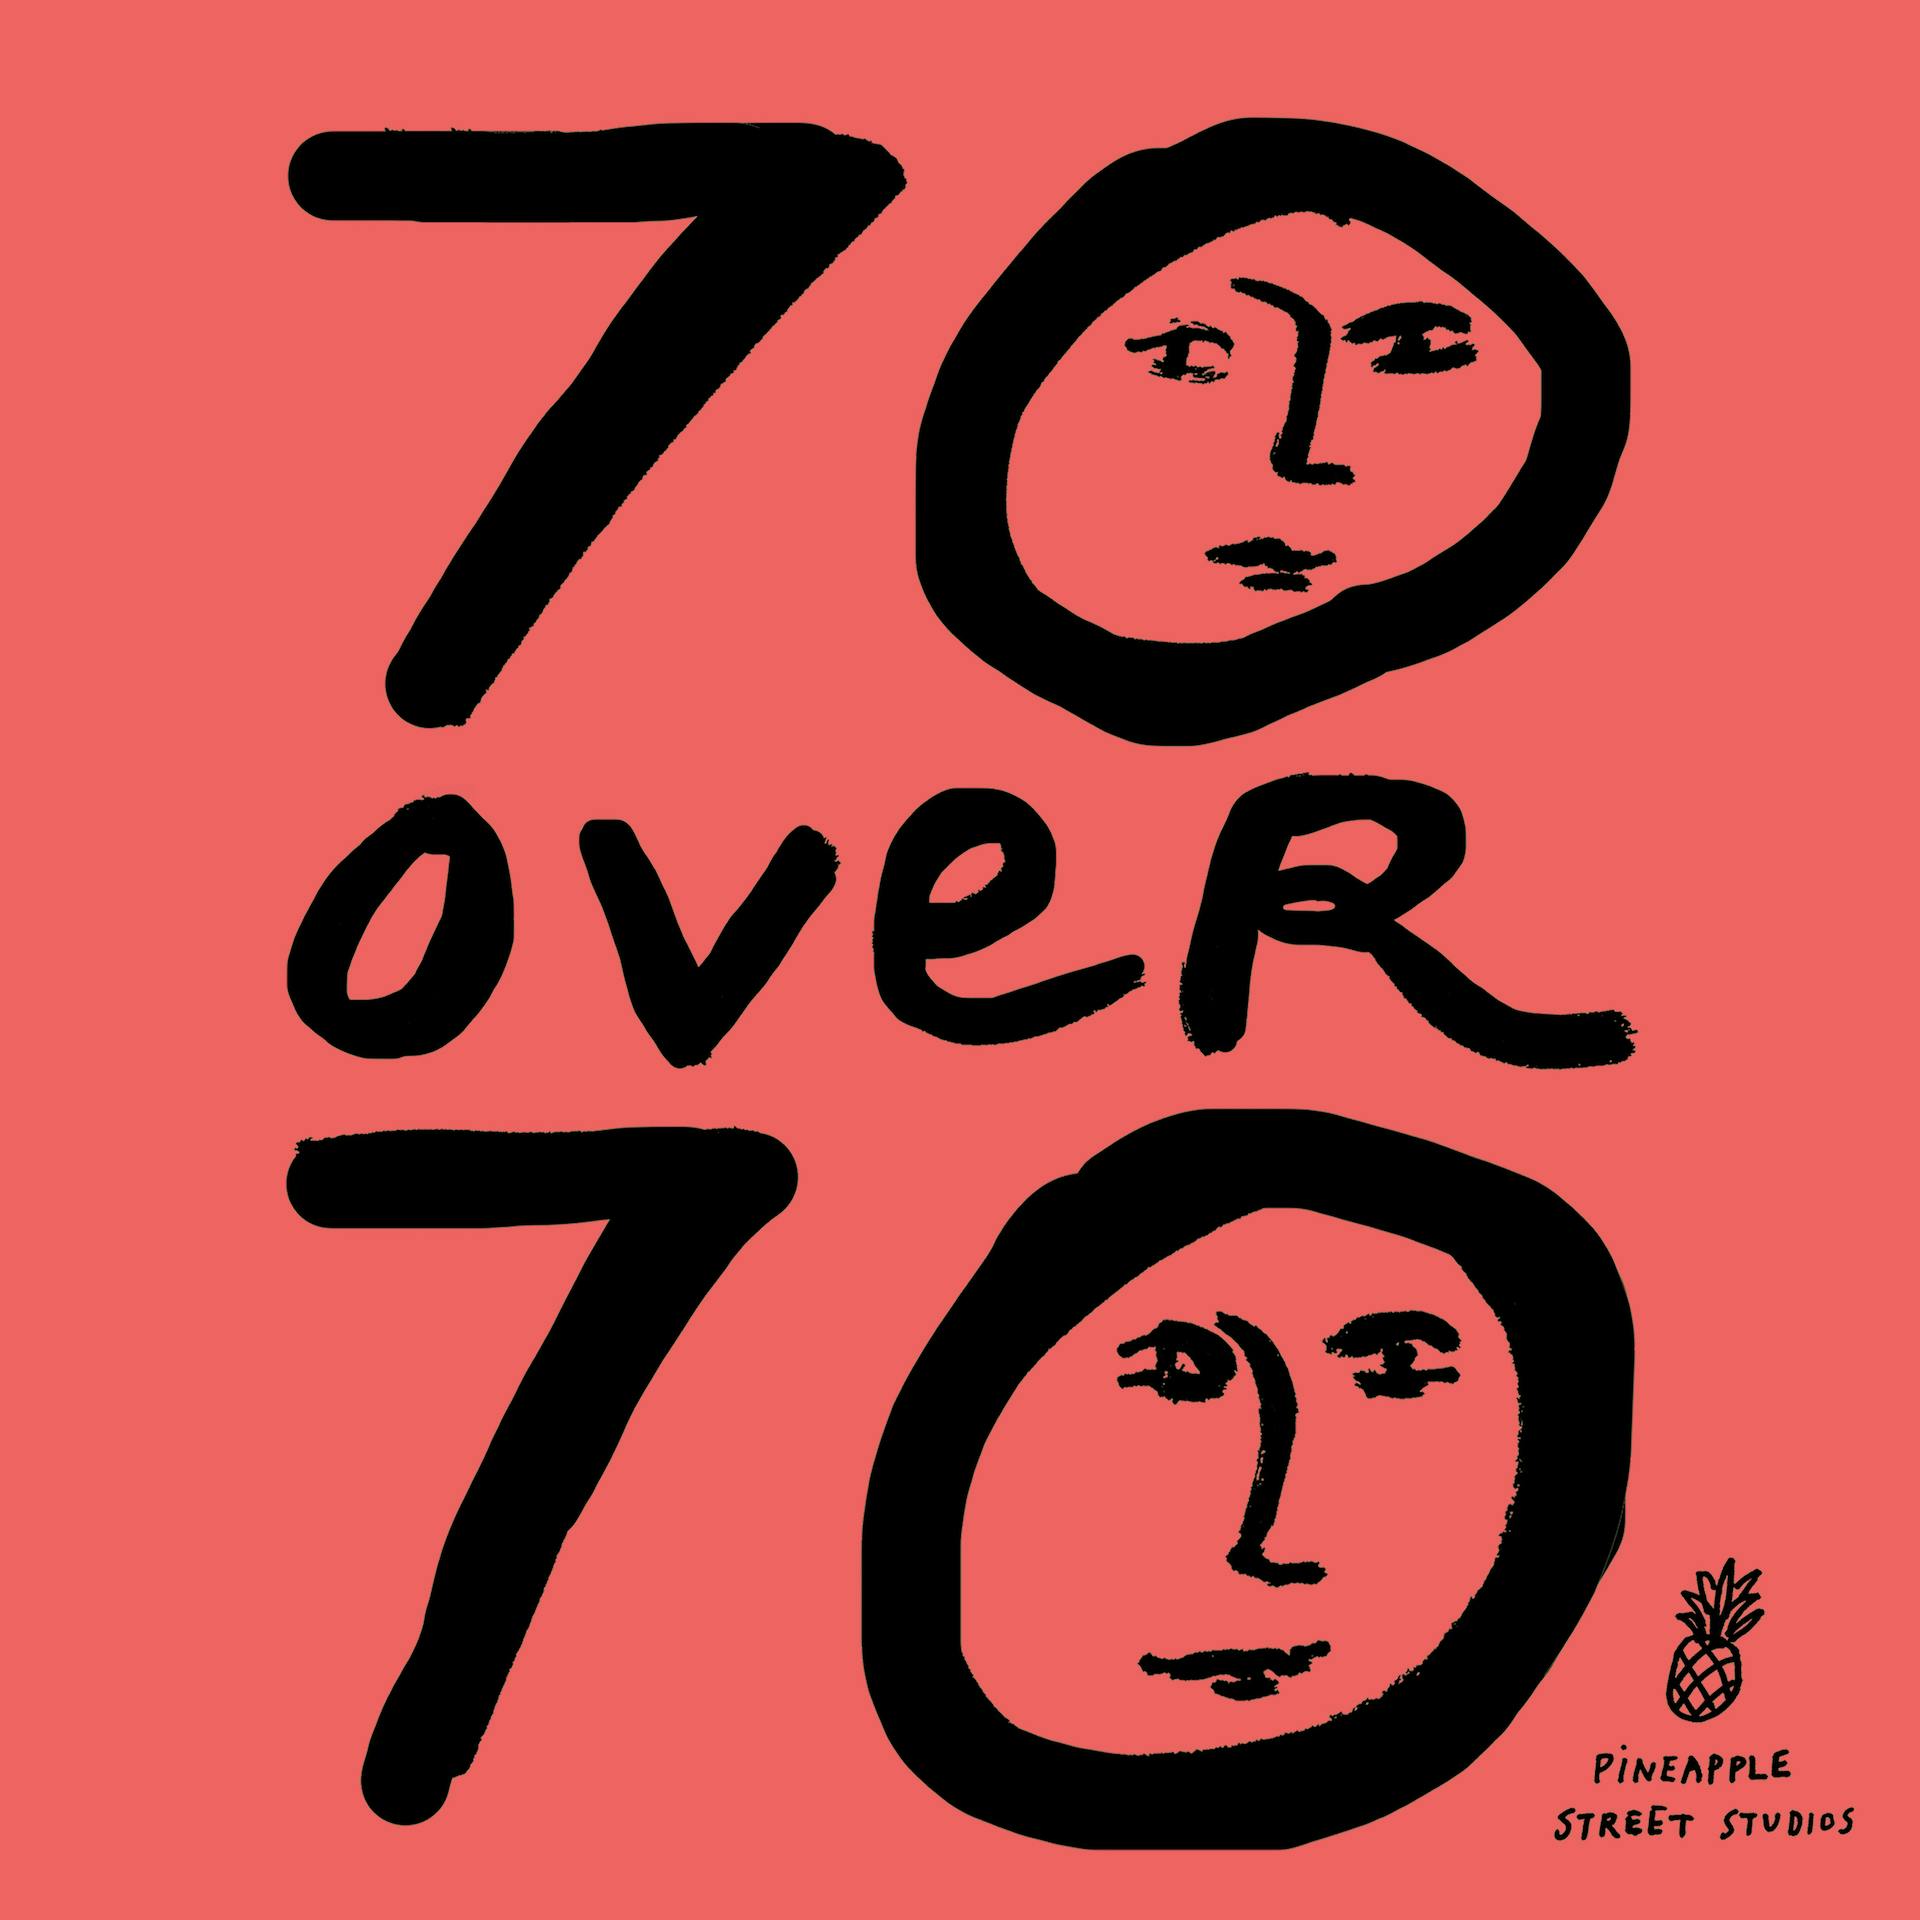 70 Over 70 podcast show image